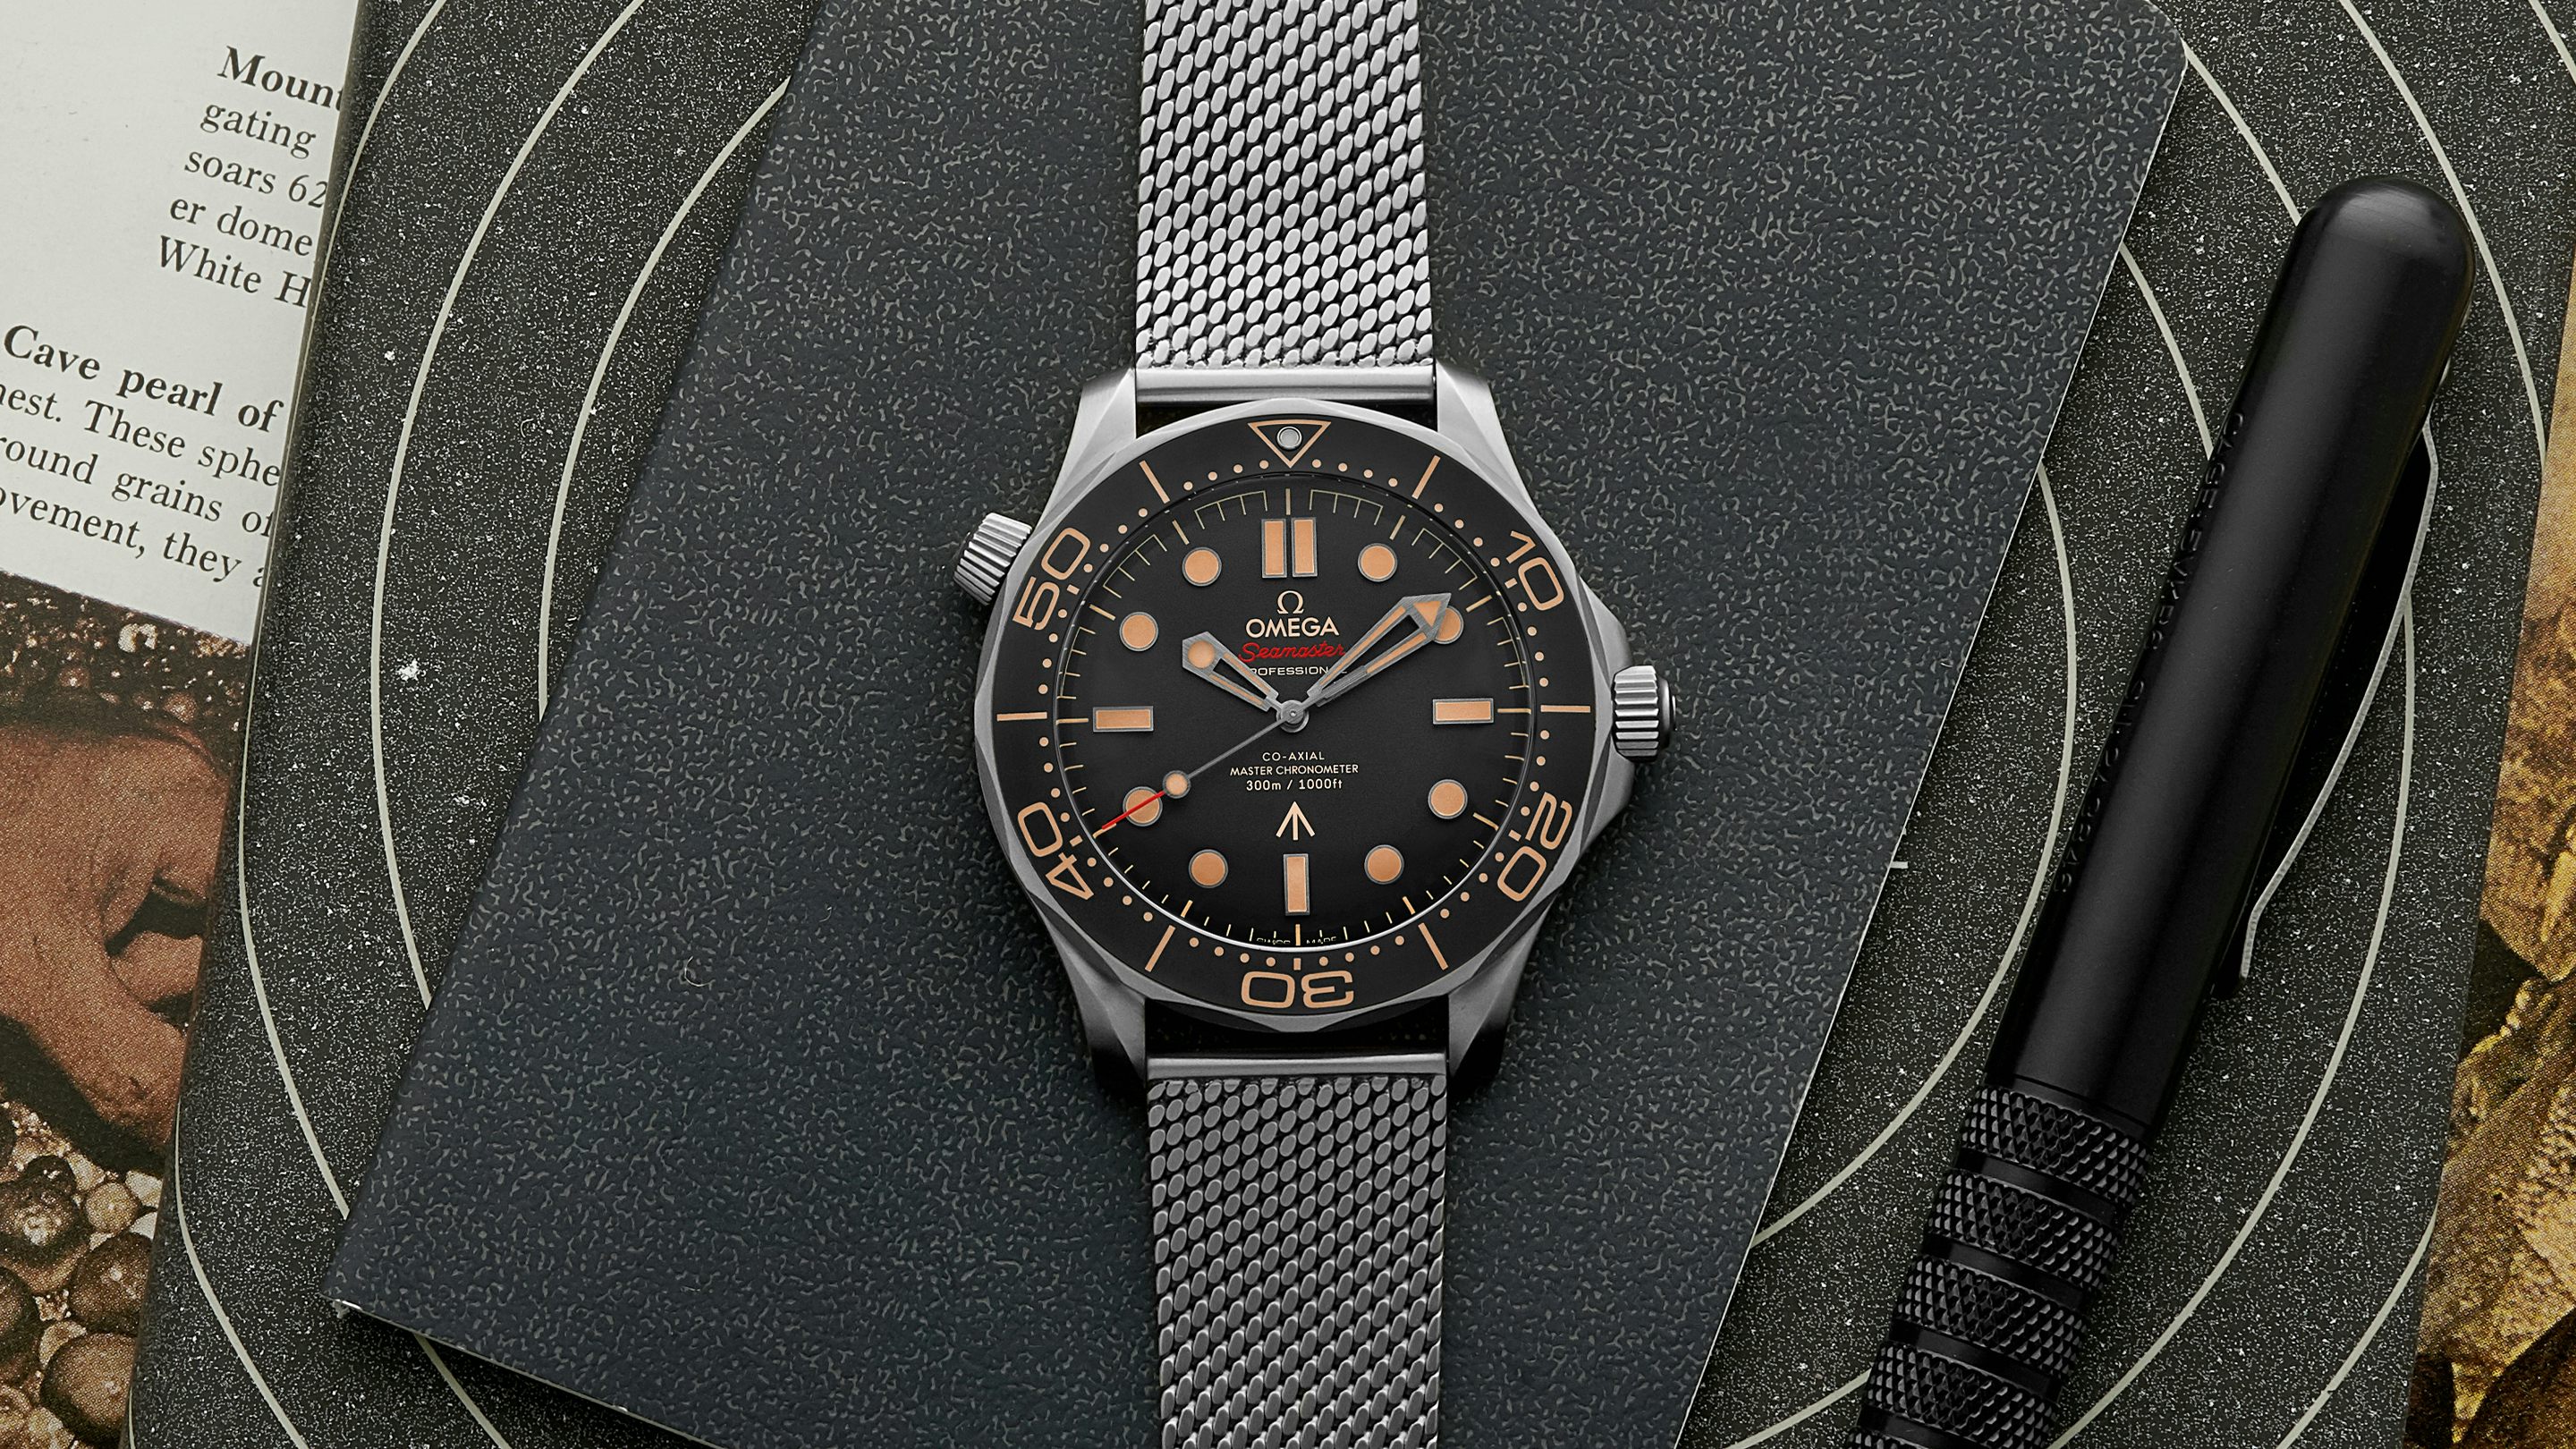 Always Wanted To Own James Bond's Watch? Well, Now's Your Chance